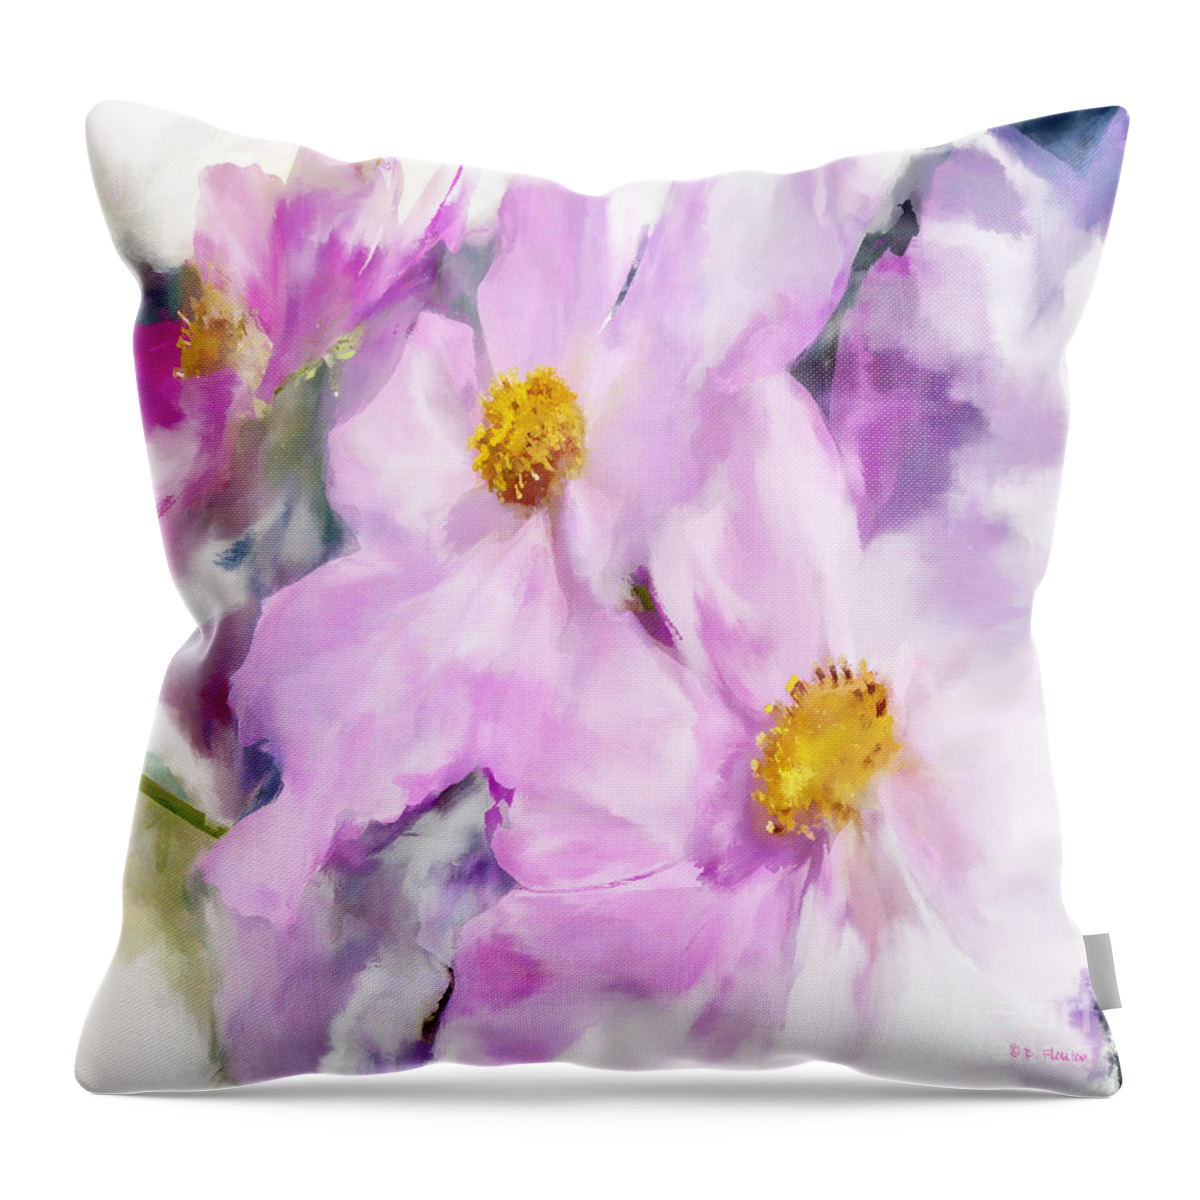 Ebsq Throw Pillow featuring the digital art In the PInk by Dee Flouton